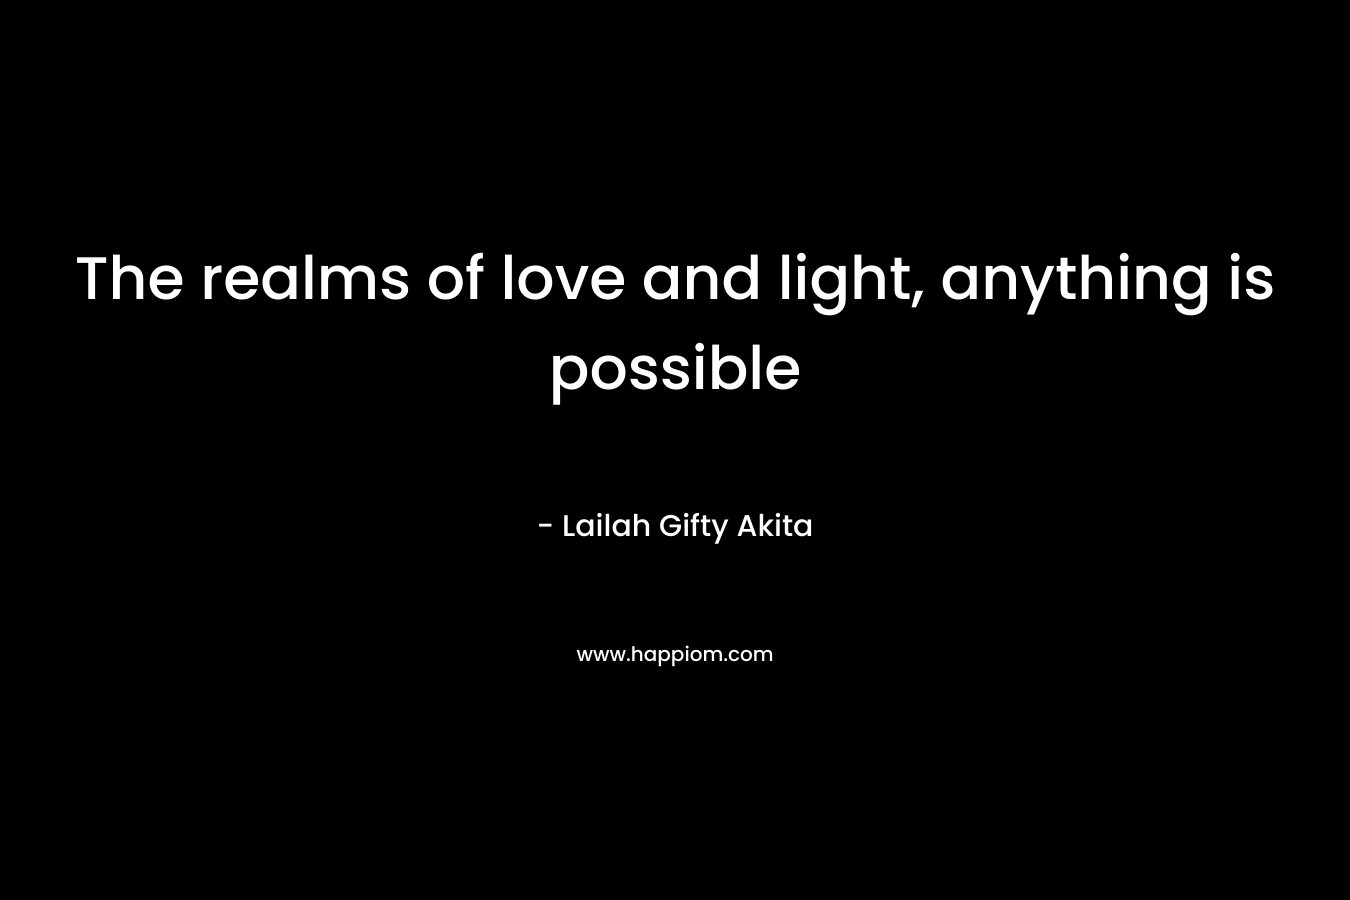 The realms of love and light, anything is possible – Lailah Gifty Akita